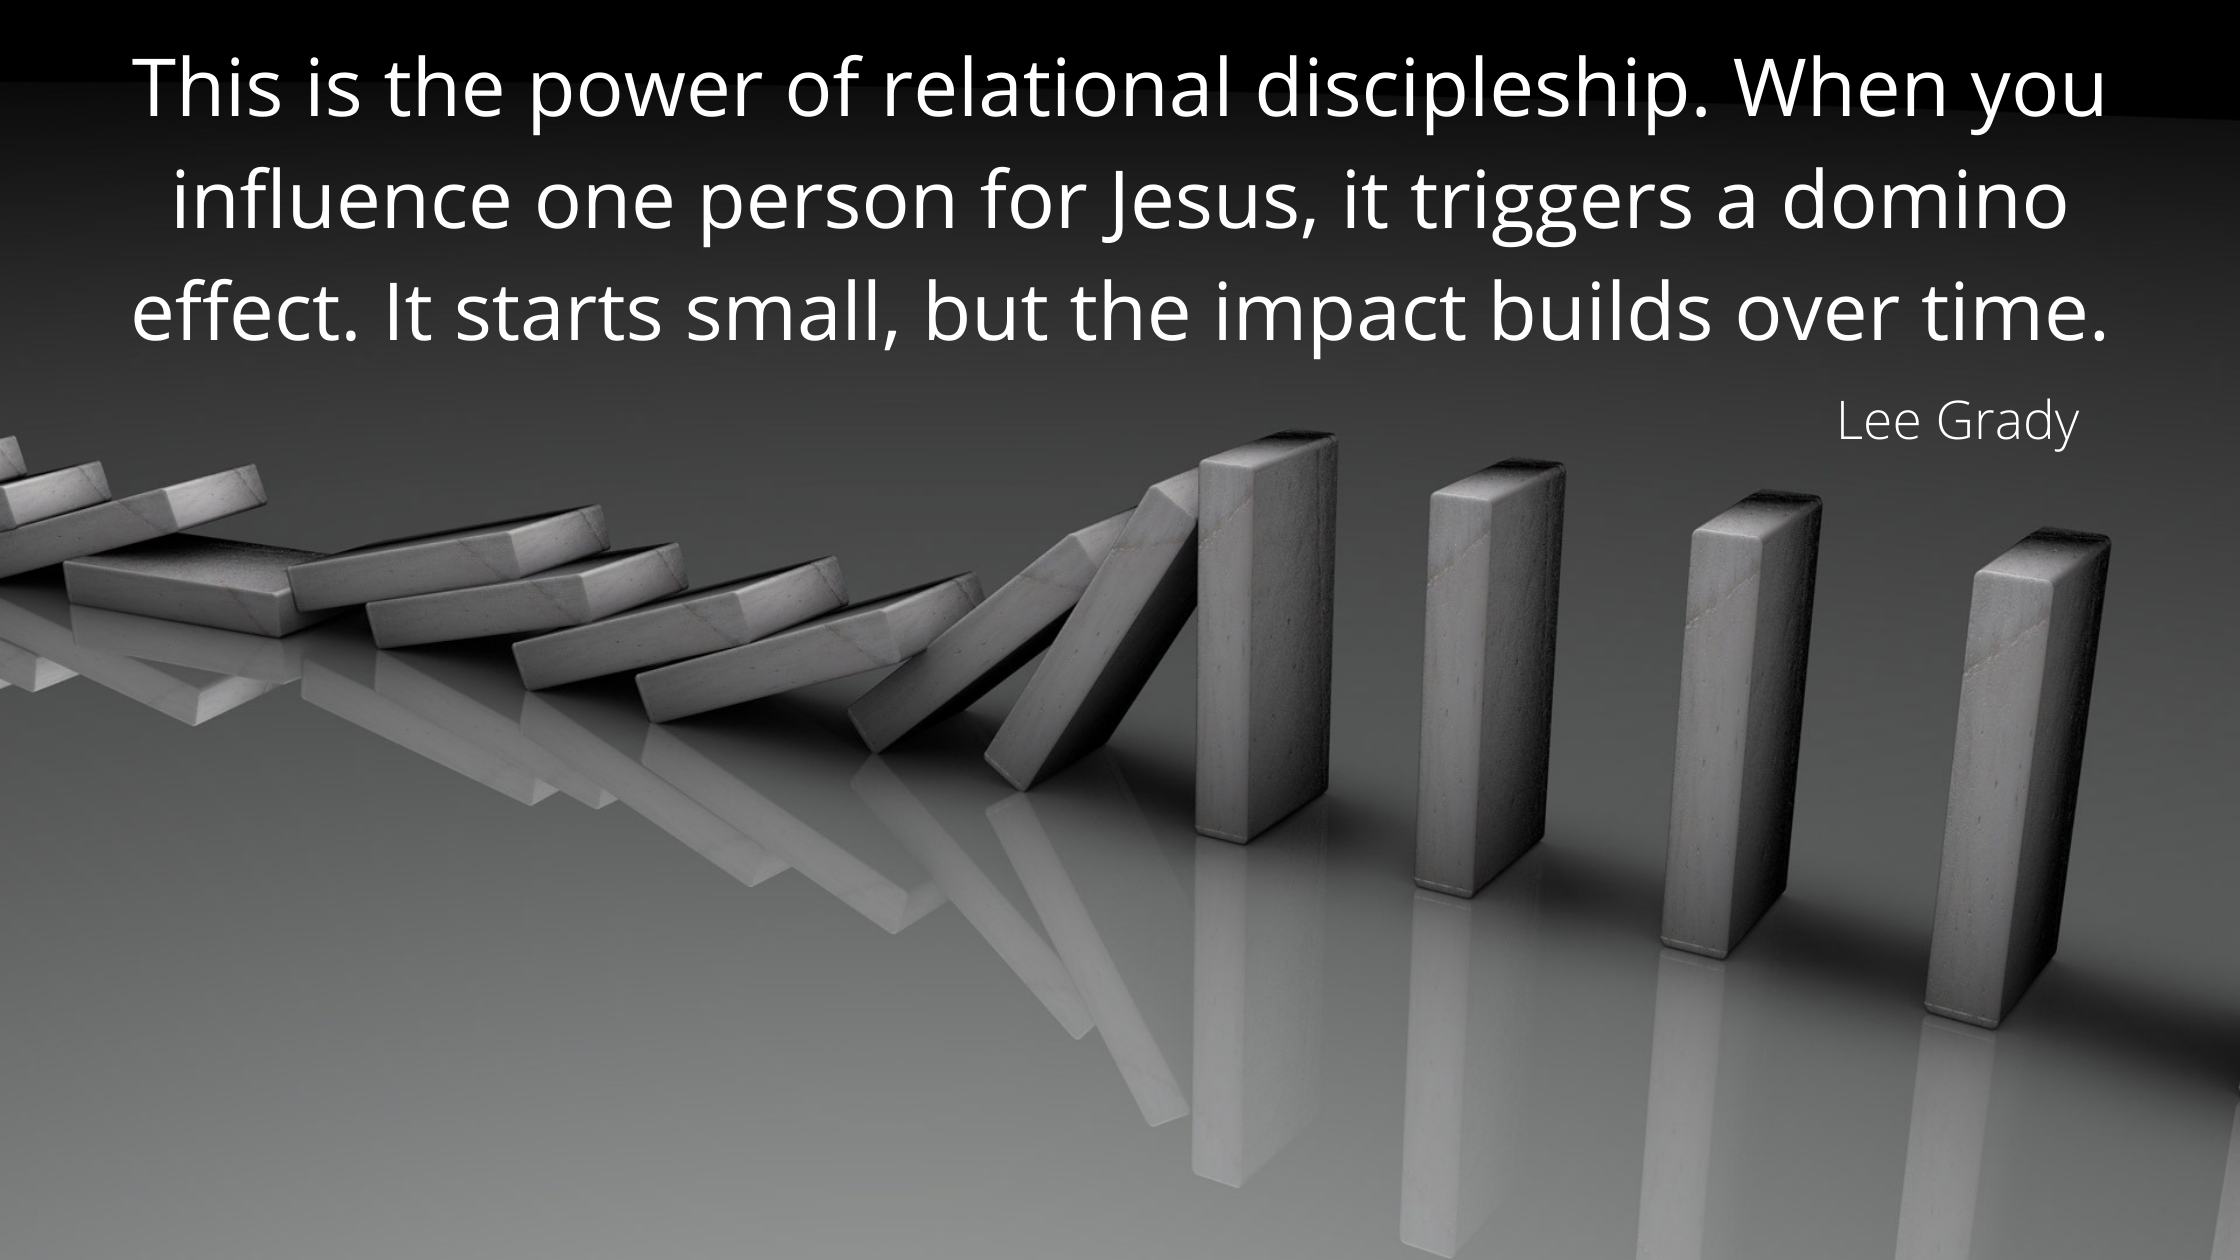 This is the power of relational discipleship. When you influence one person for Jesus, it triggers a domino effect. It starts small, but the impact bu